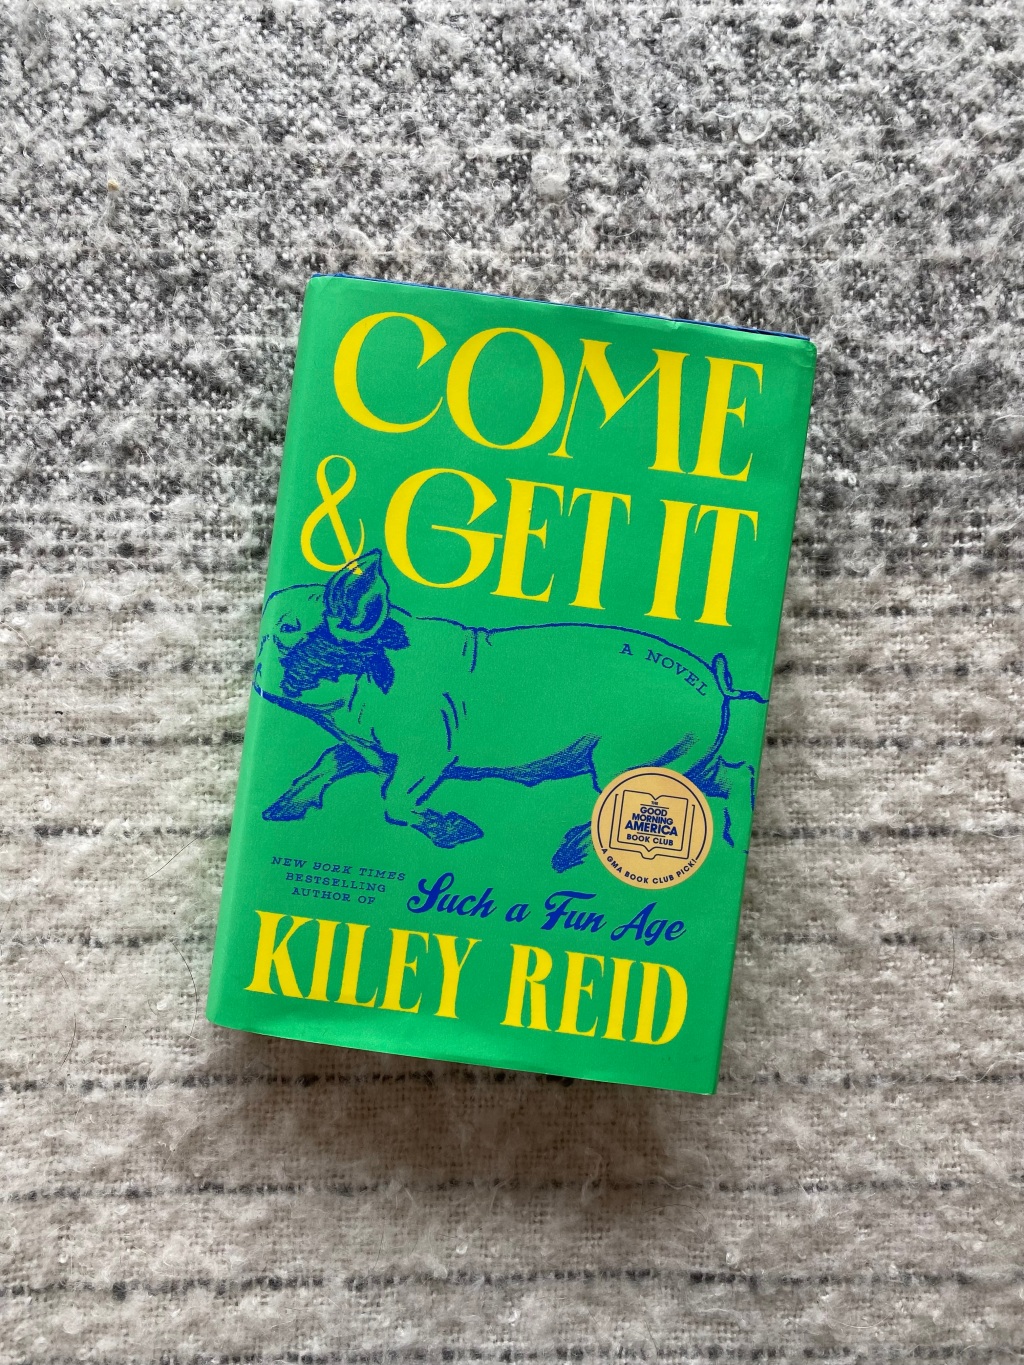 Book Review: Come & Get It by Kiley Reid